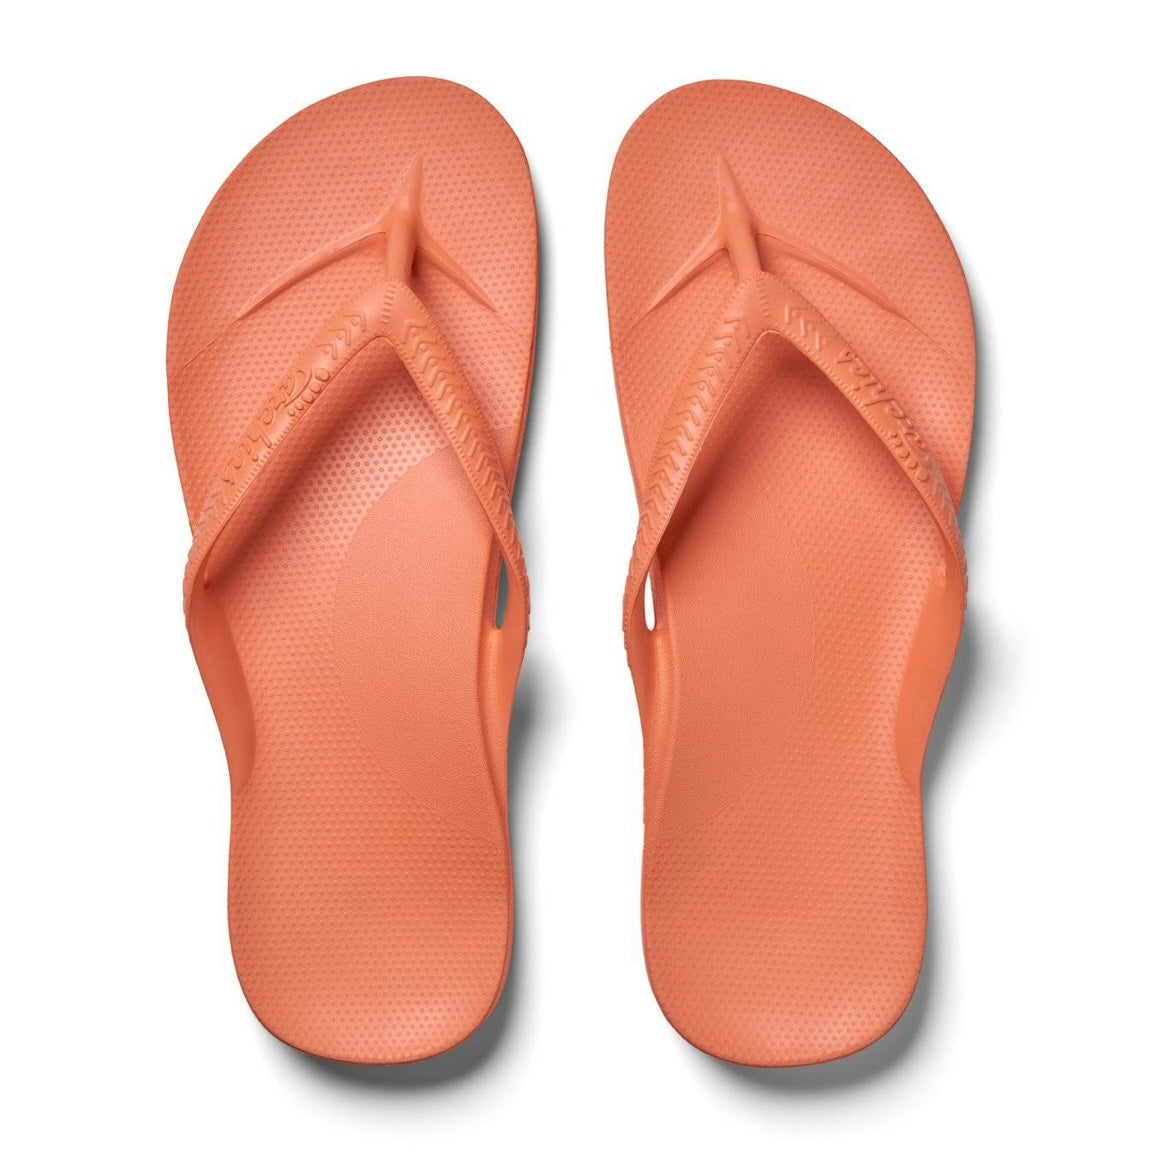 Archies Peach Arch Support Thongs Flip Flop Orthotic